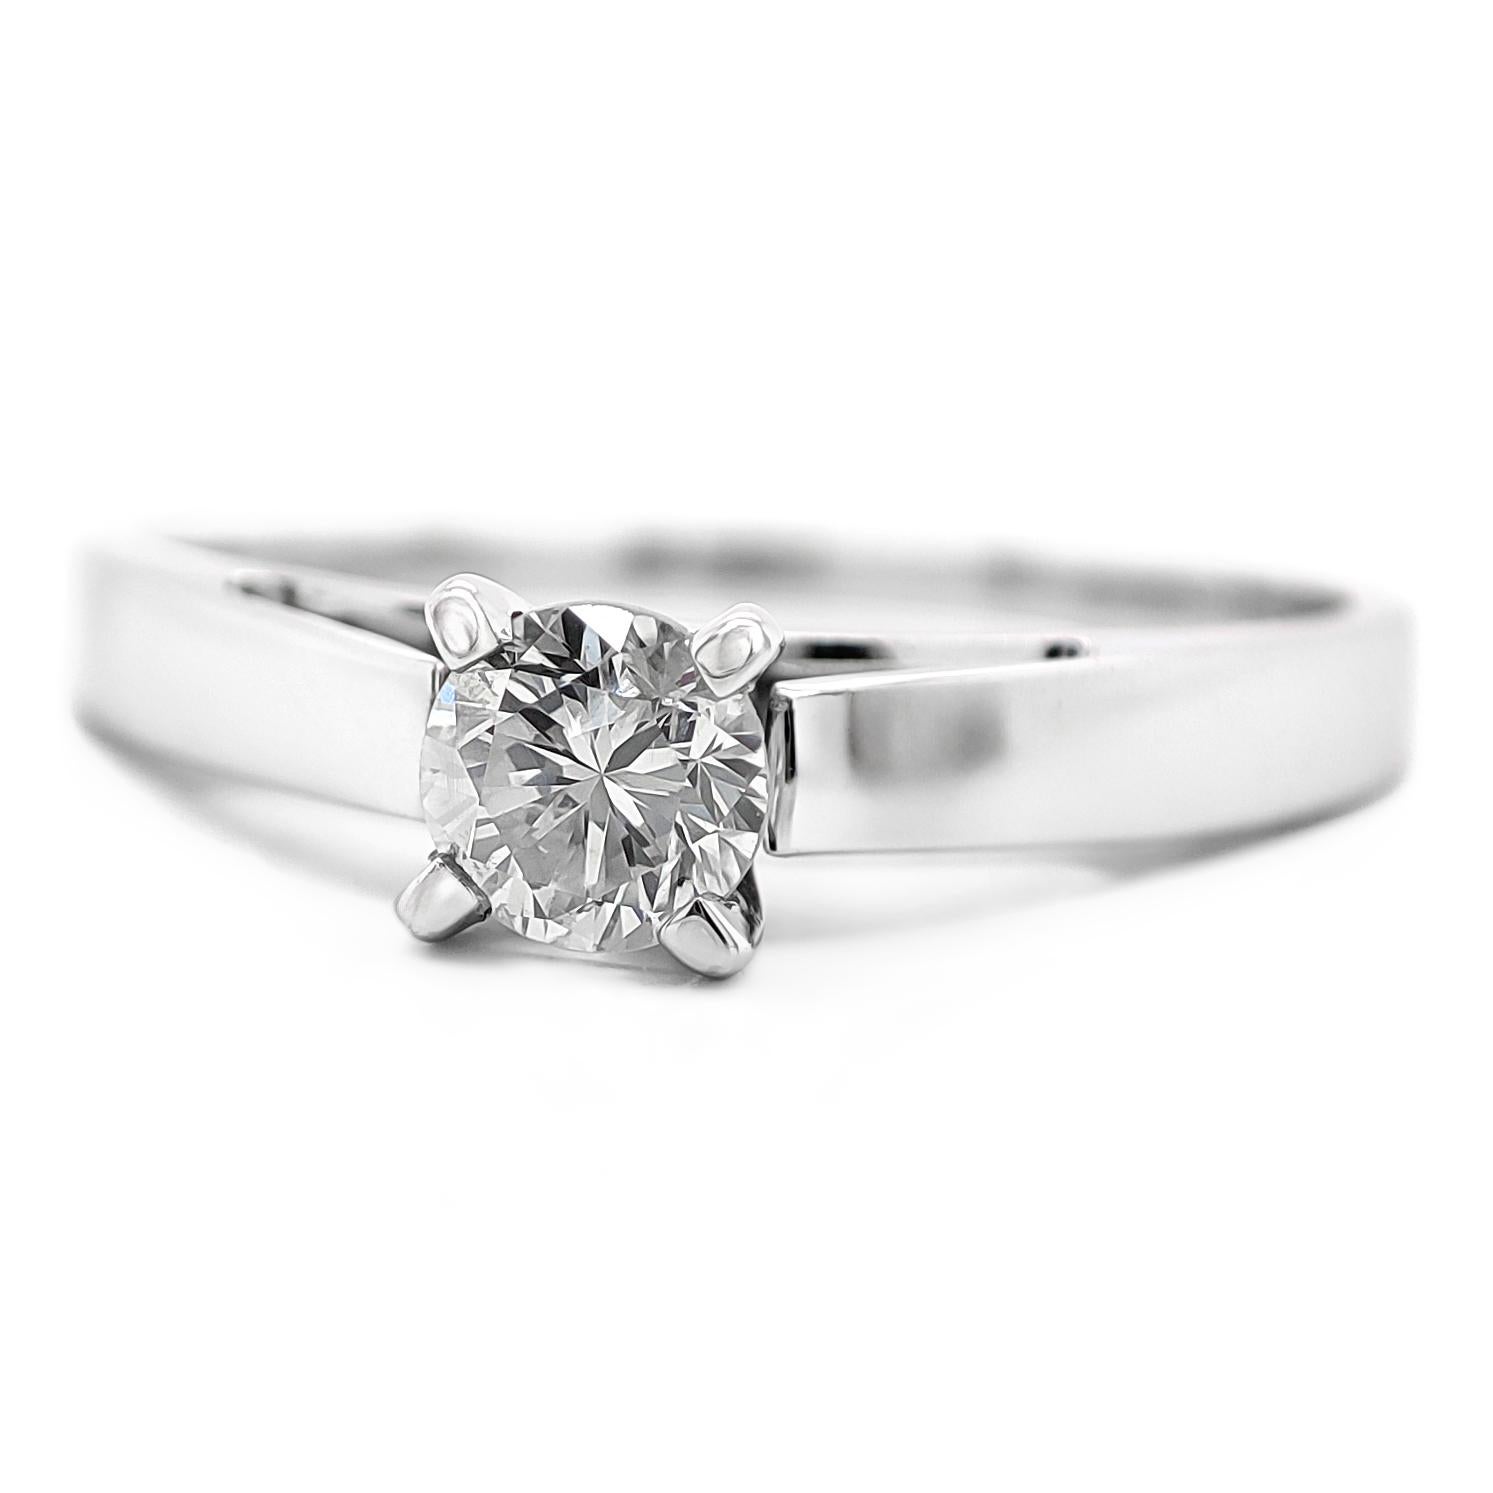 FOR US BUYER NO VAT

This engagement ring is a symbol of love and commitment. The stunning 0.26 carat round diamond takes center stage, capturing the essence of your special bond with its exquisite brilliance.

The ring is crafted in 14K white gold,